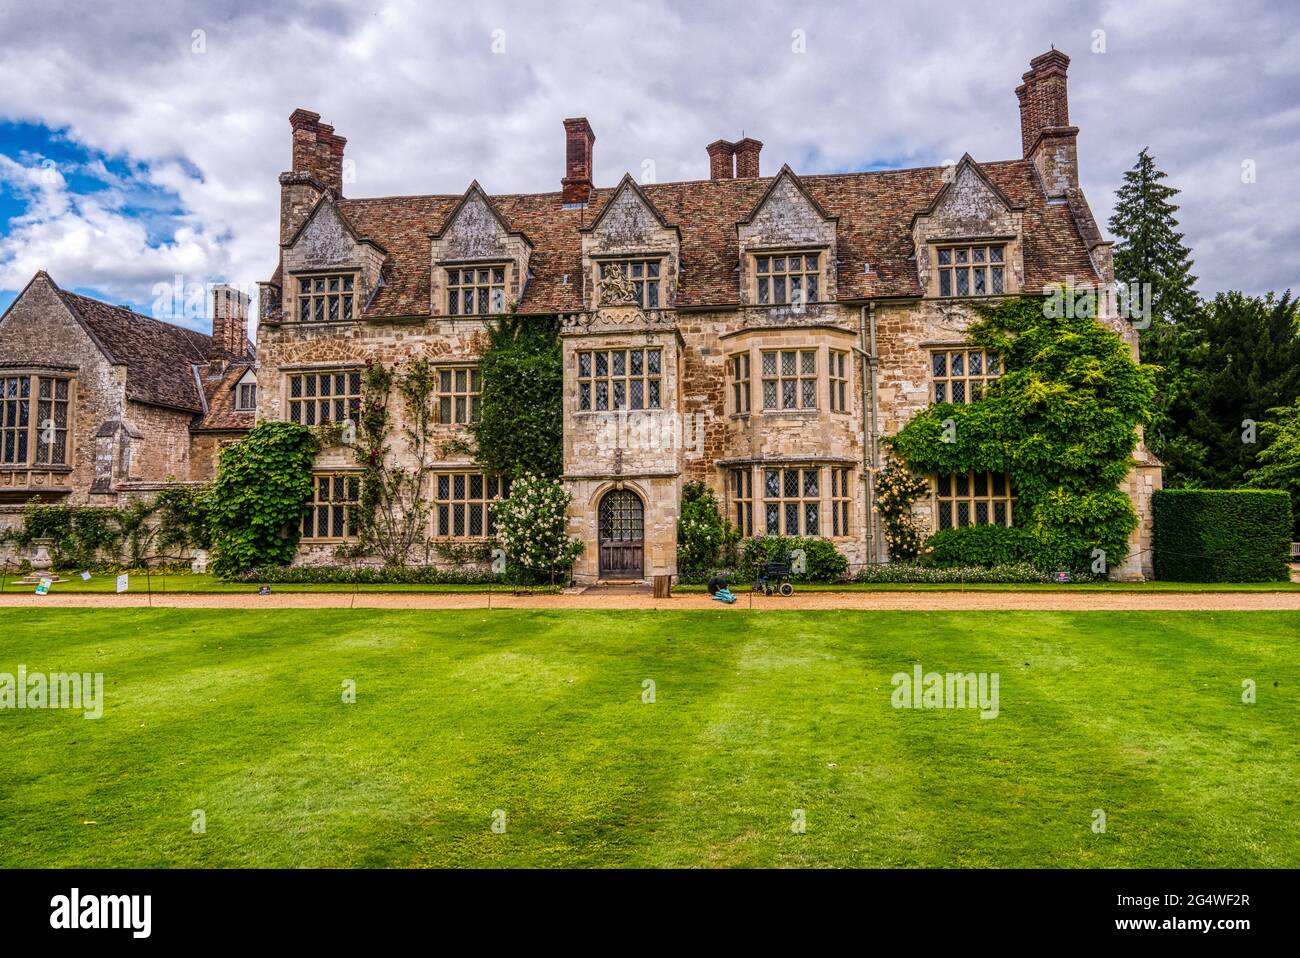 Attractive country mansion. Anglesey Abbey, a Jacobean-style country house at Lode, near Camdridge, UK, now part of the British National Trust. Stock Photo